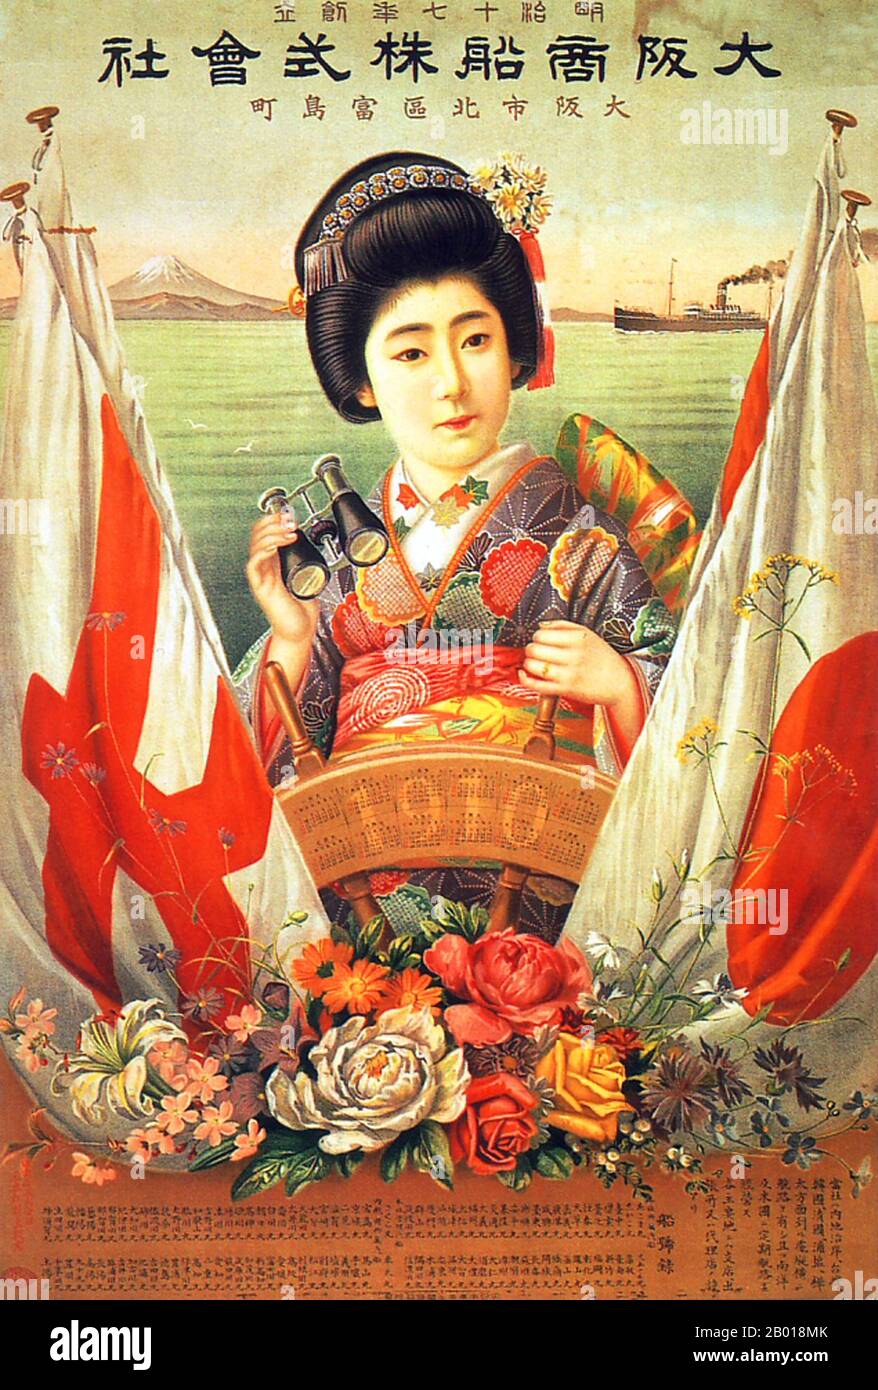 Japan: Advertising poster for the Osaka Mercantile Steamship Company, 1909.  Osaka Mercantile Steamship Co., poster featuring a kimono-clad woman with a pair of binoculars. Tradition meets modernity. Stock Photo